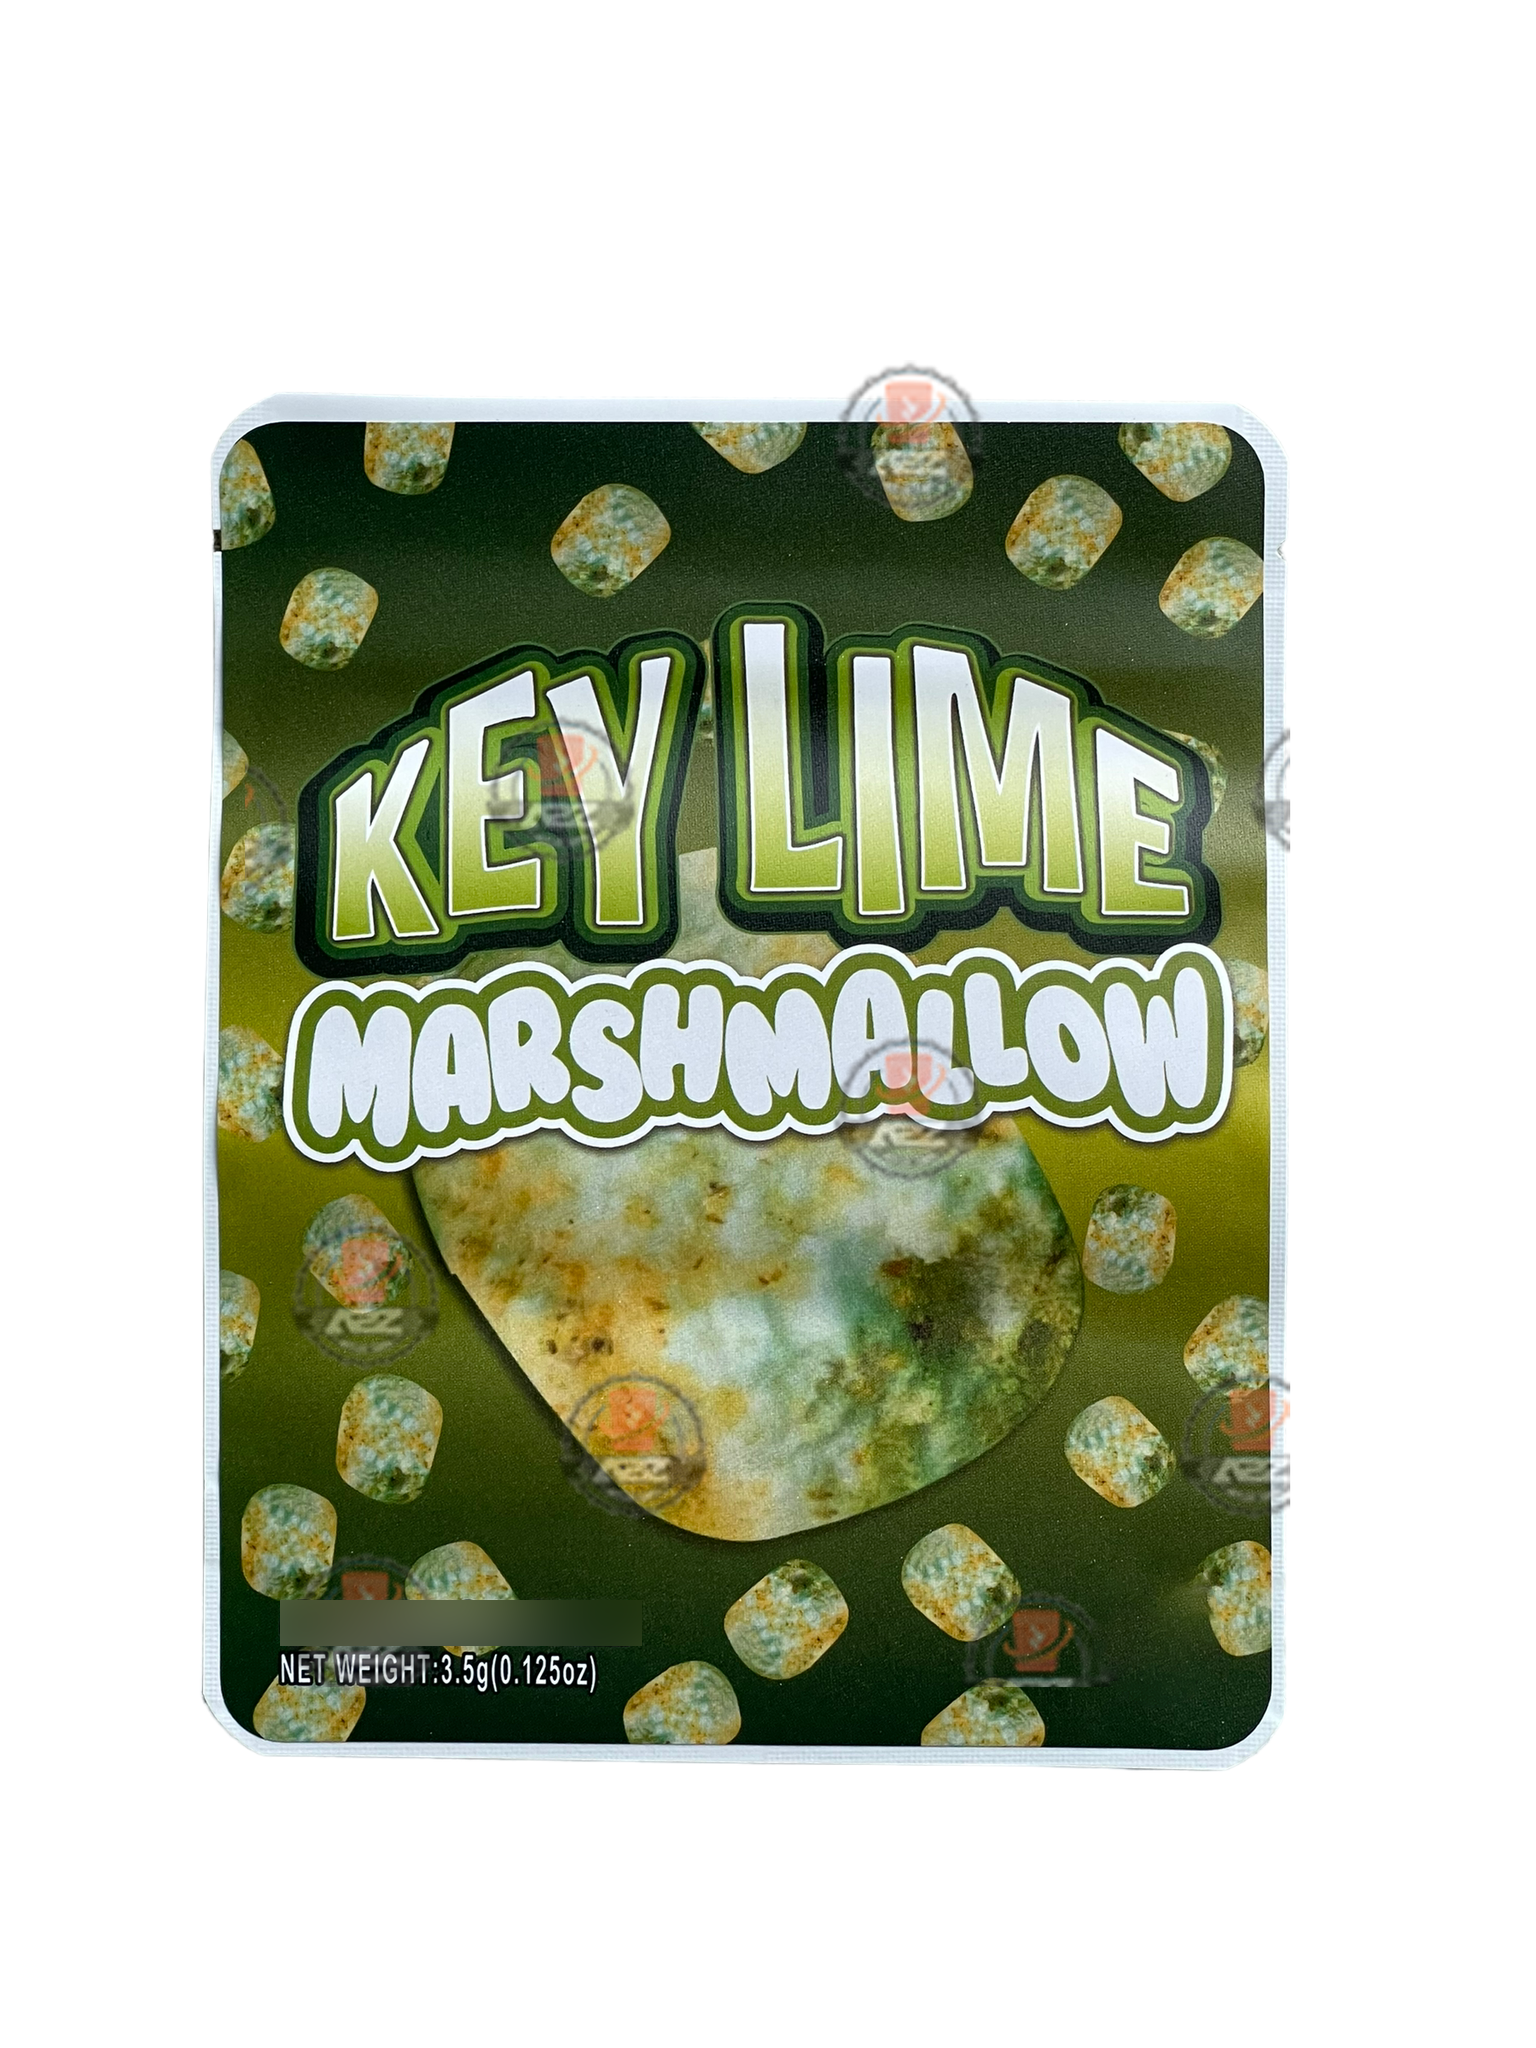 Sprinklez Key Lime Marshmallow Mylar Bags 3.5g Sticker base Bag -With stickers and labels